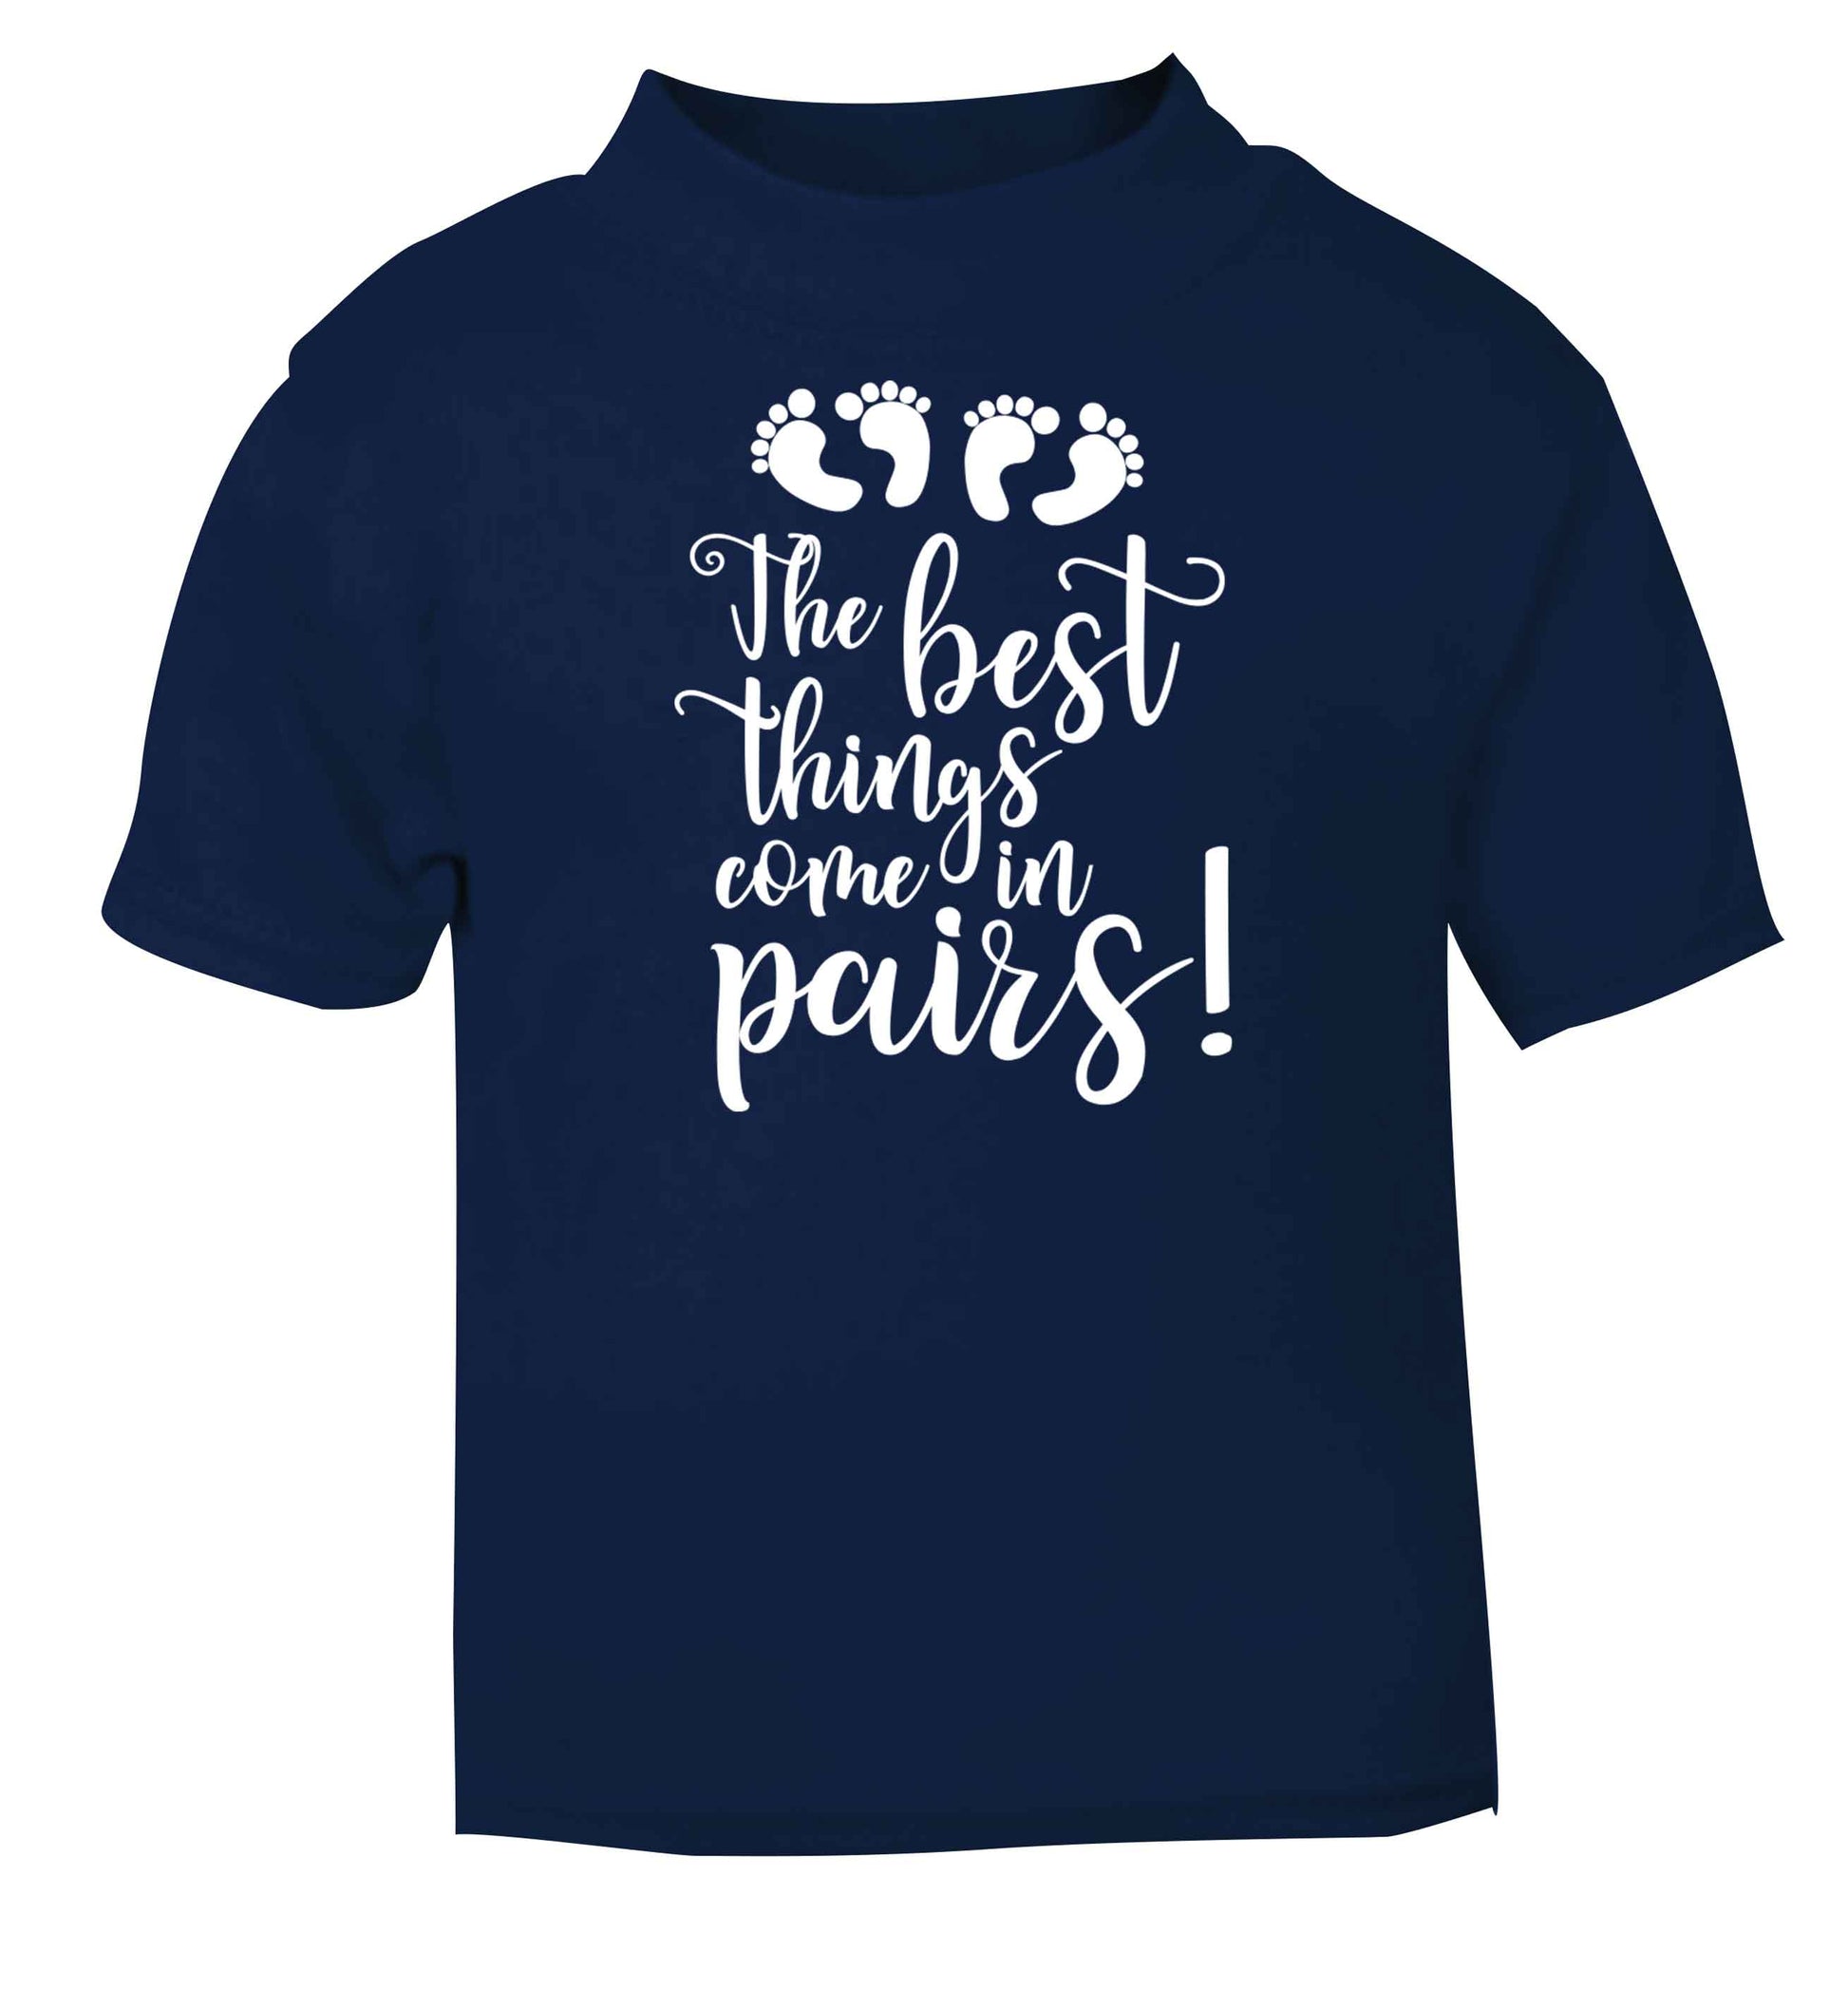 The best things come in pairs! navy baby toddler Tshirt 2 Years